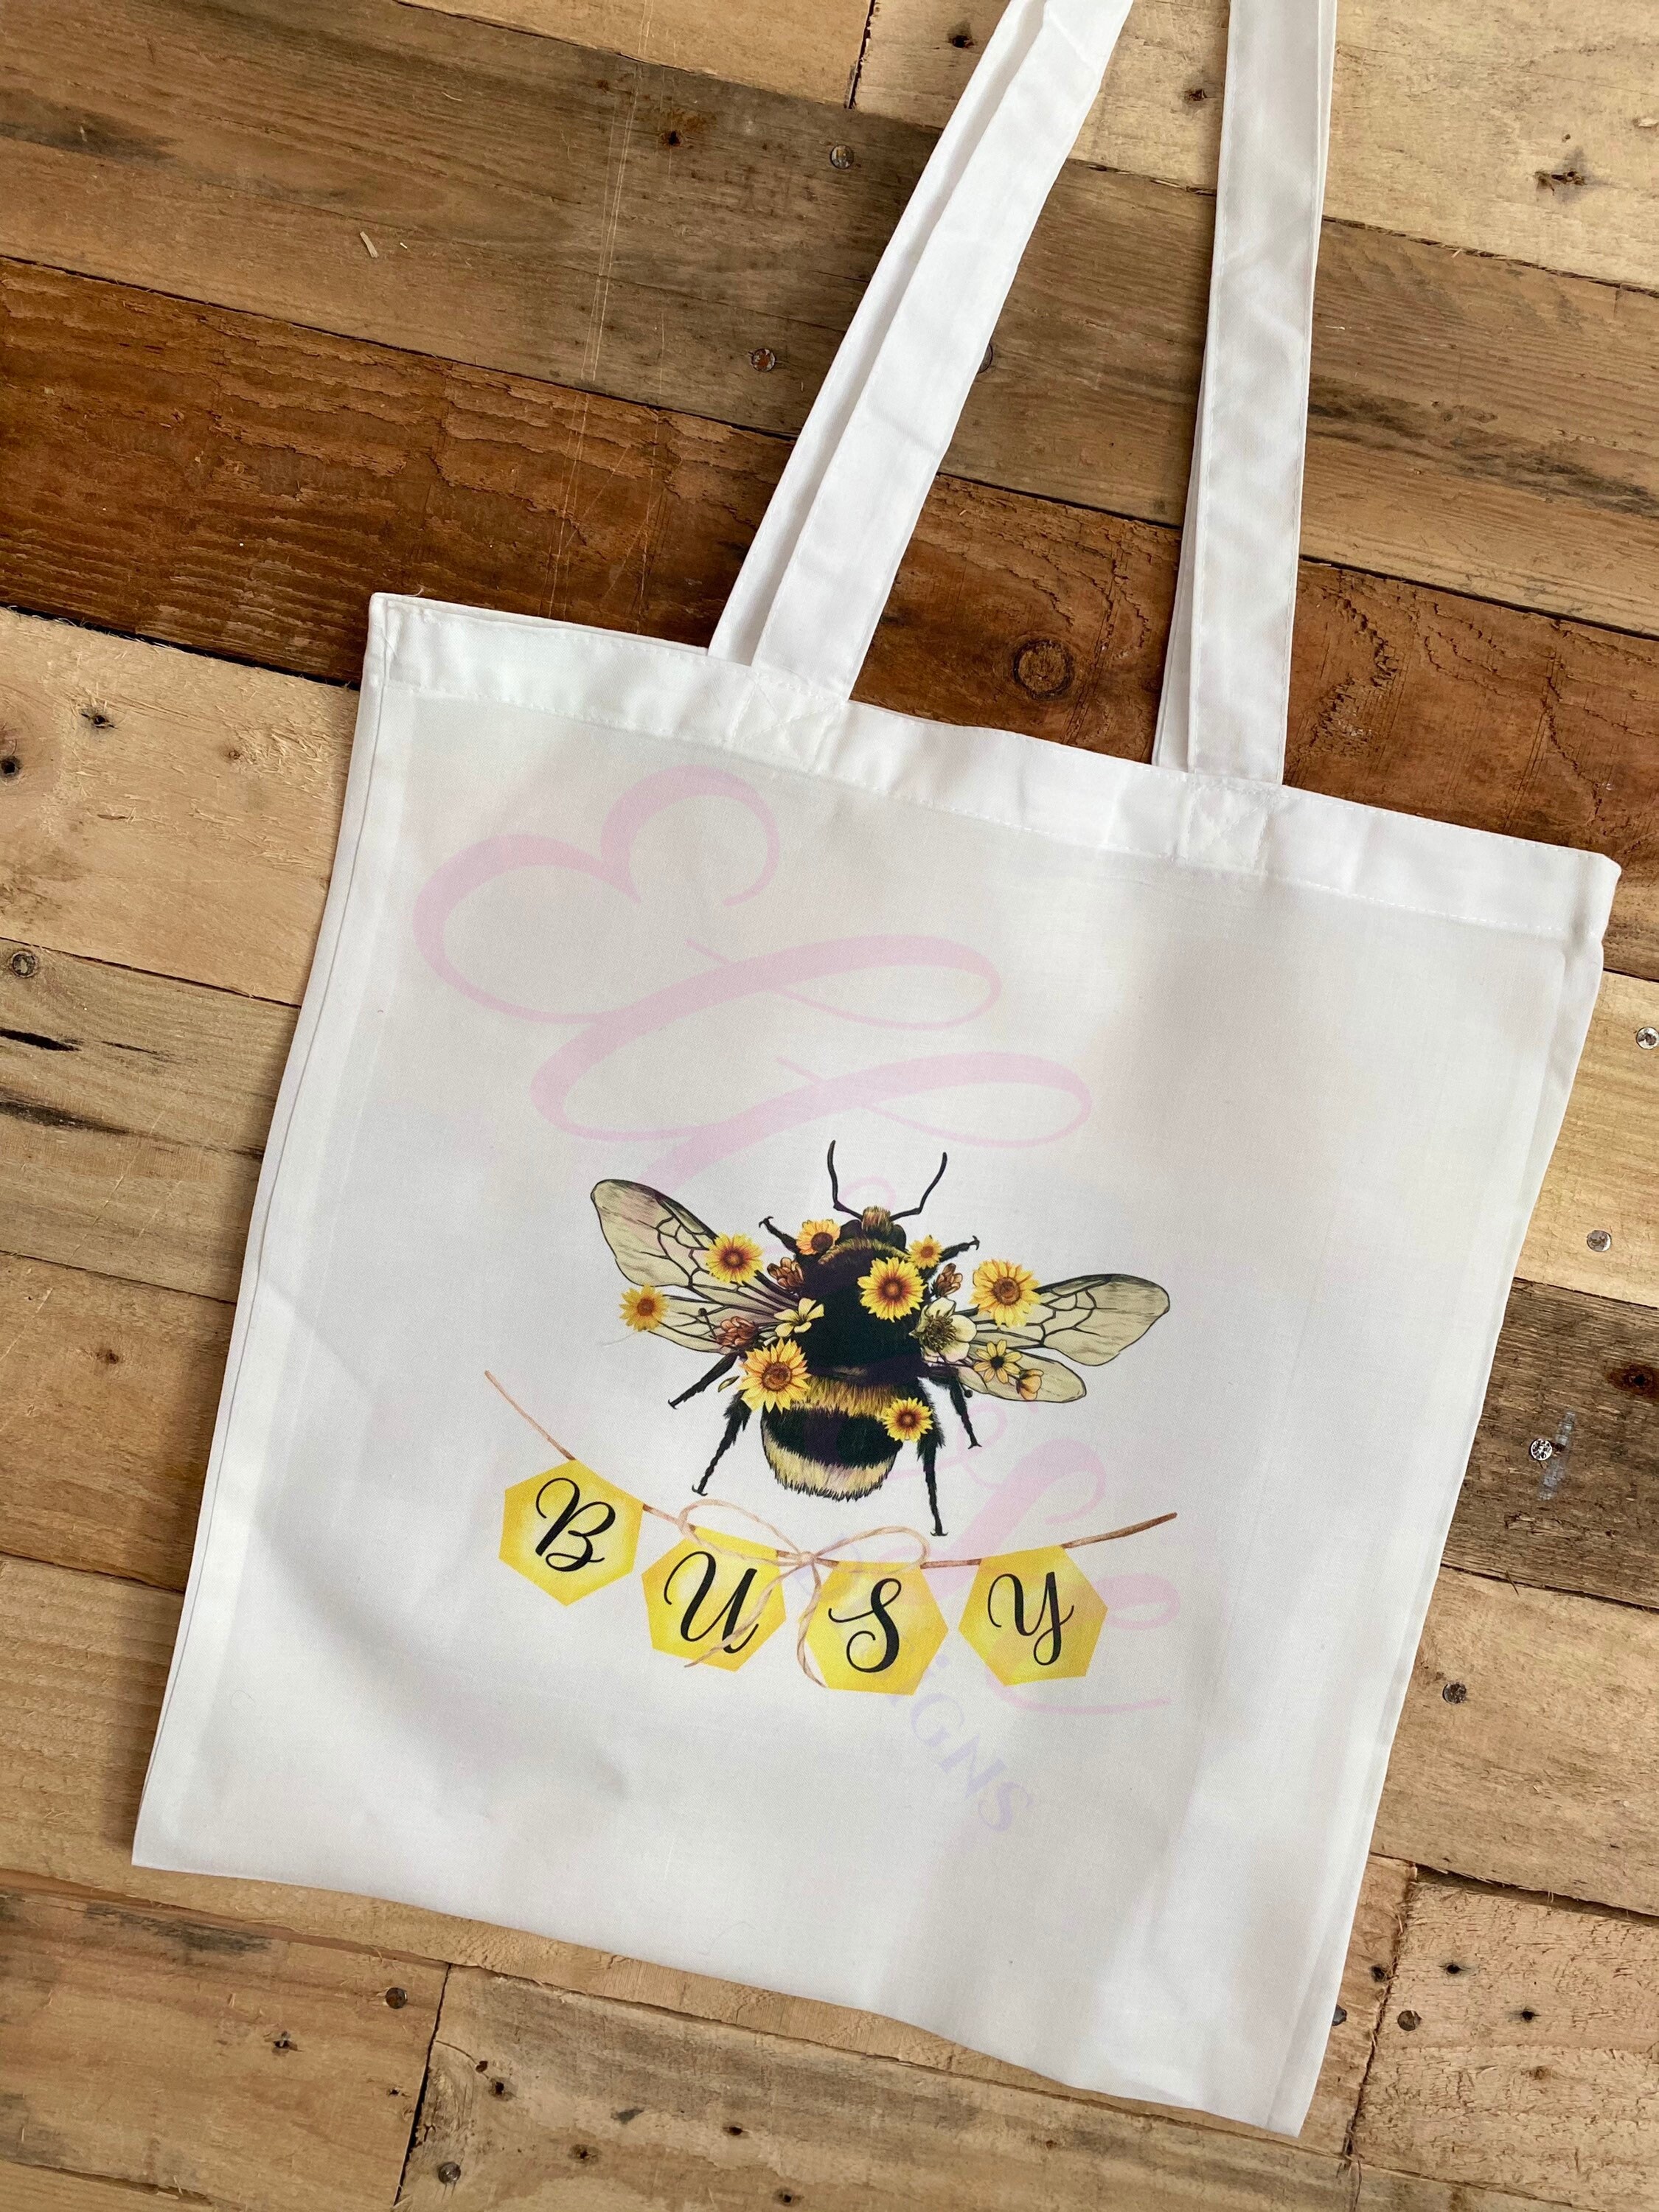 Bumble bee bag tote shopping bag busy bee ladies gift | Etsy